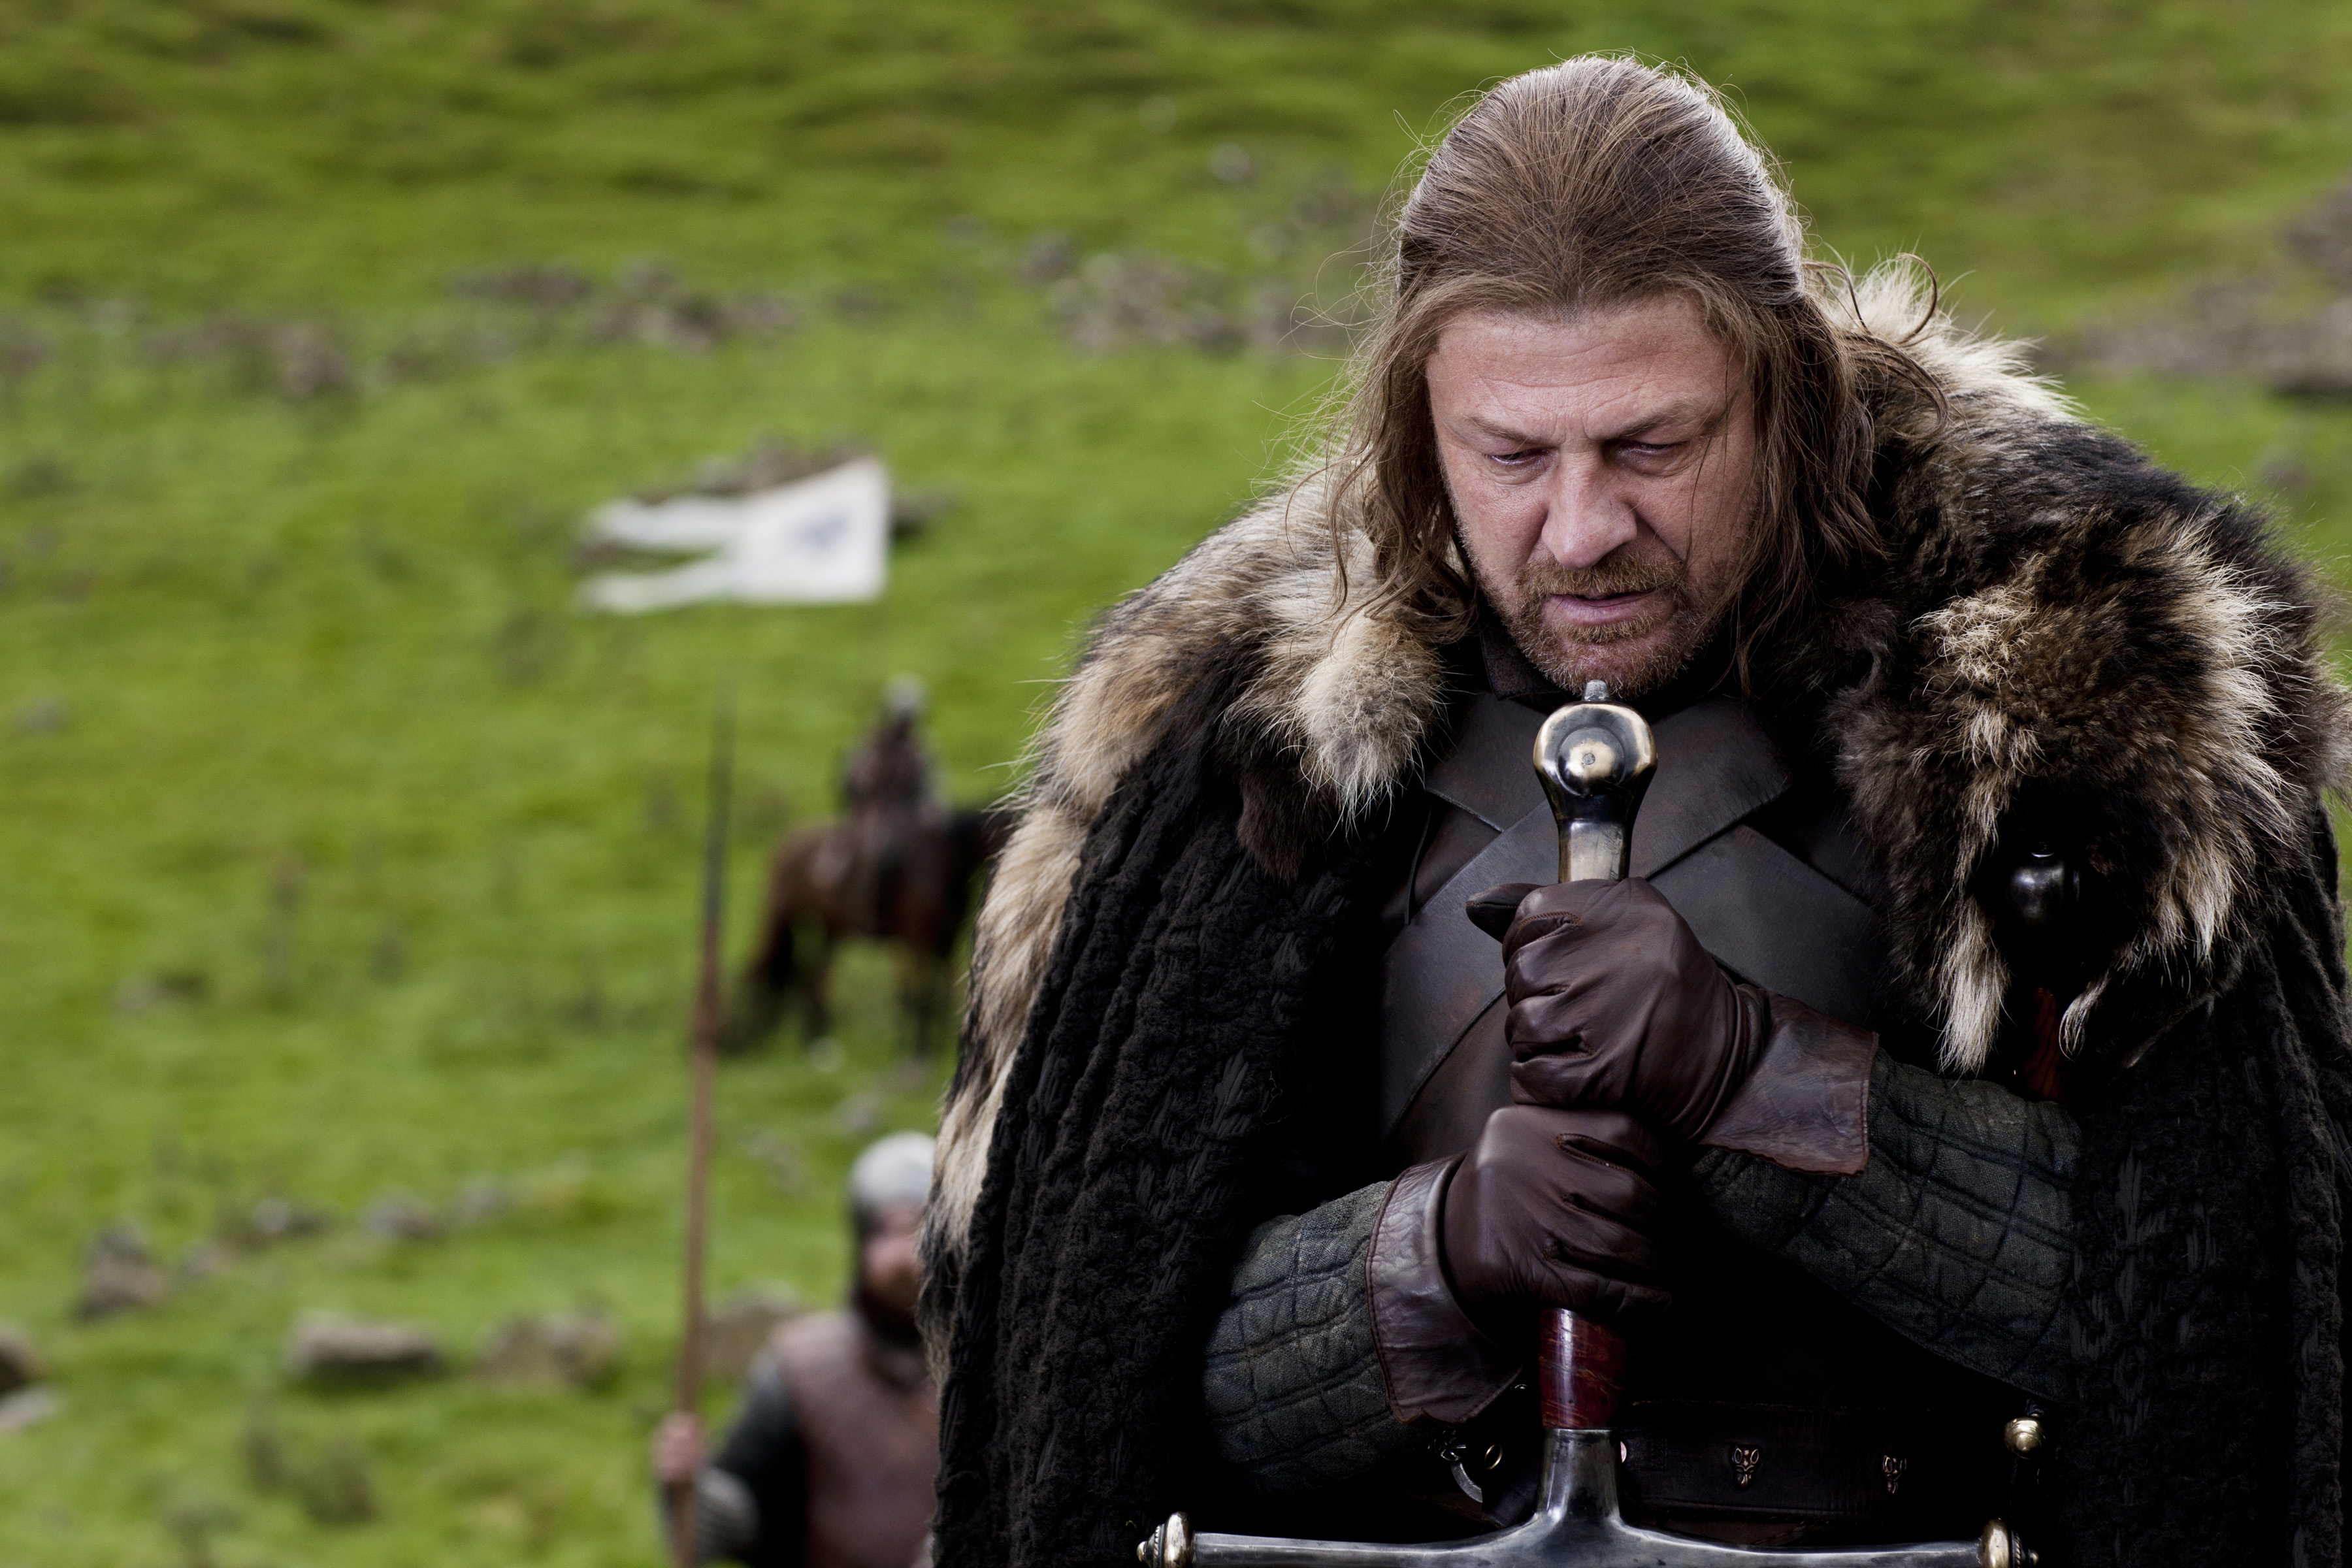 Choose Which of These Characters to Revive and We’ll Reveal Your Street Smart % Sean Bean as Ned Stark on Game of Thrones